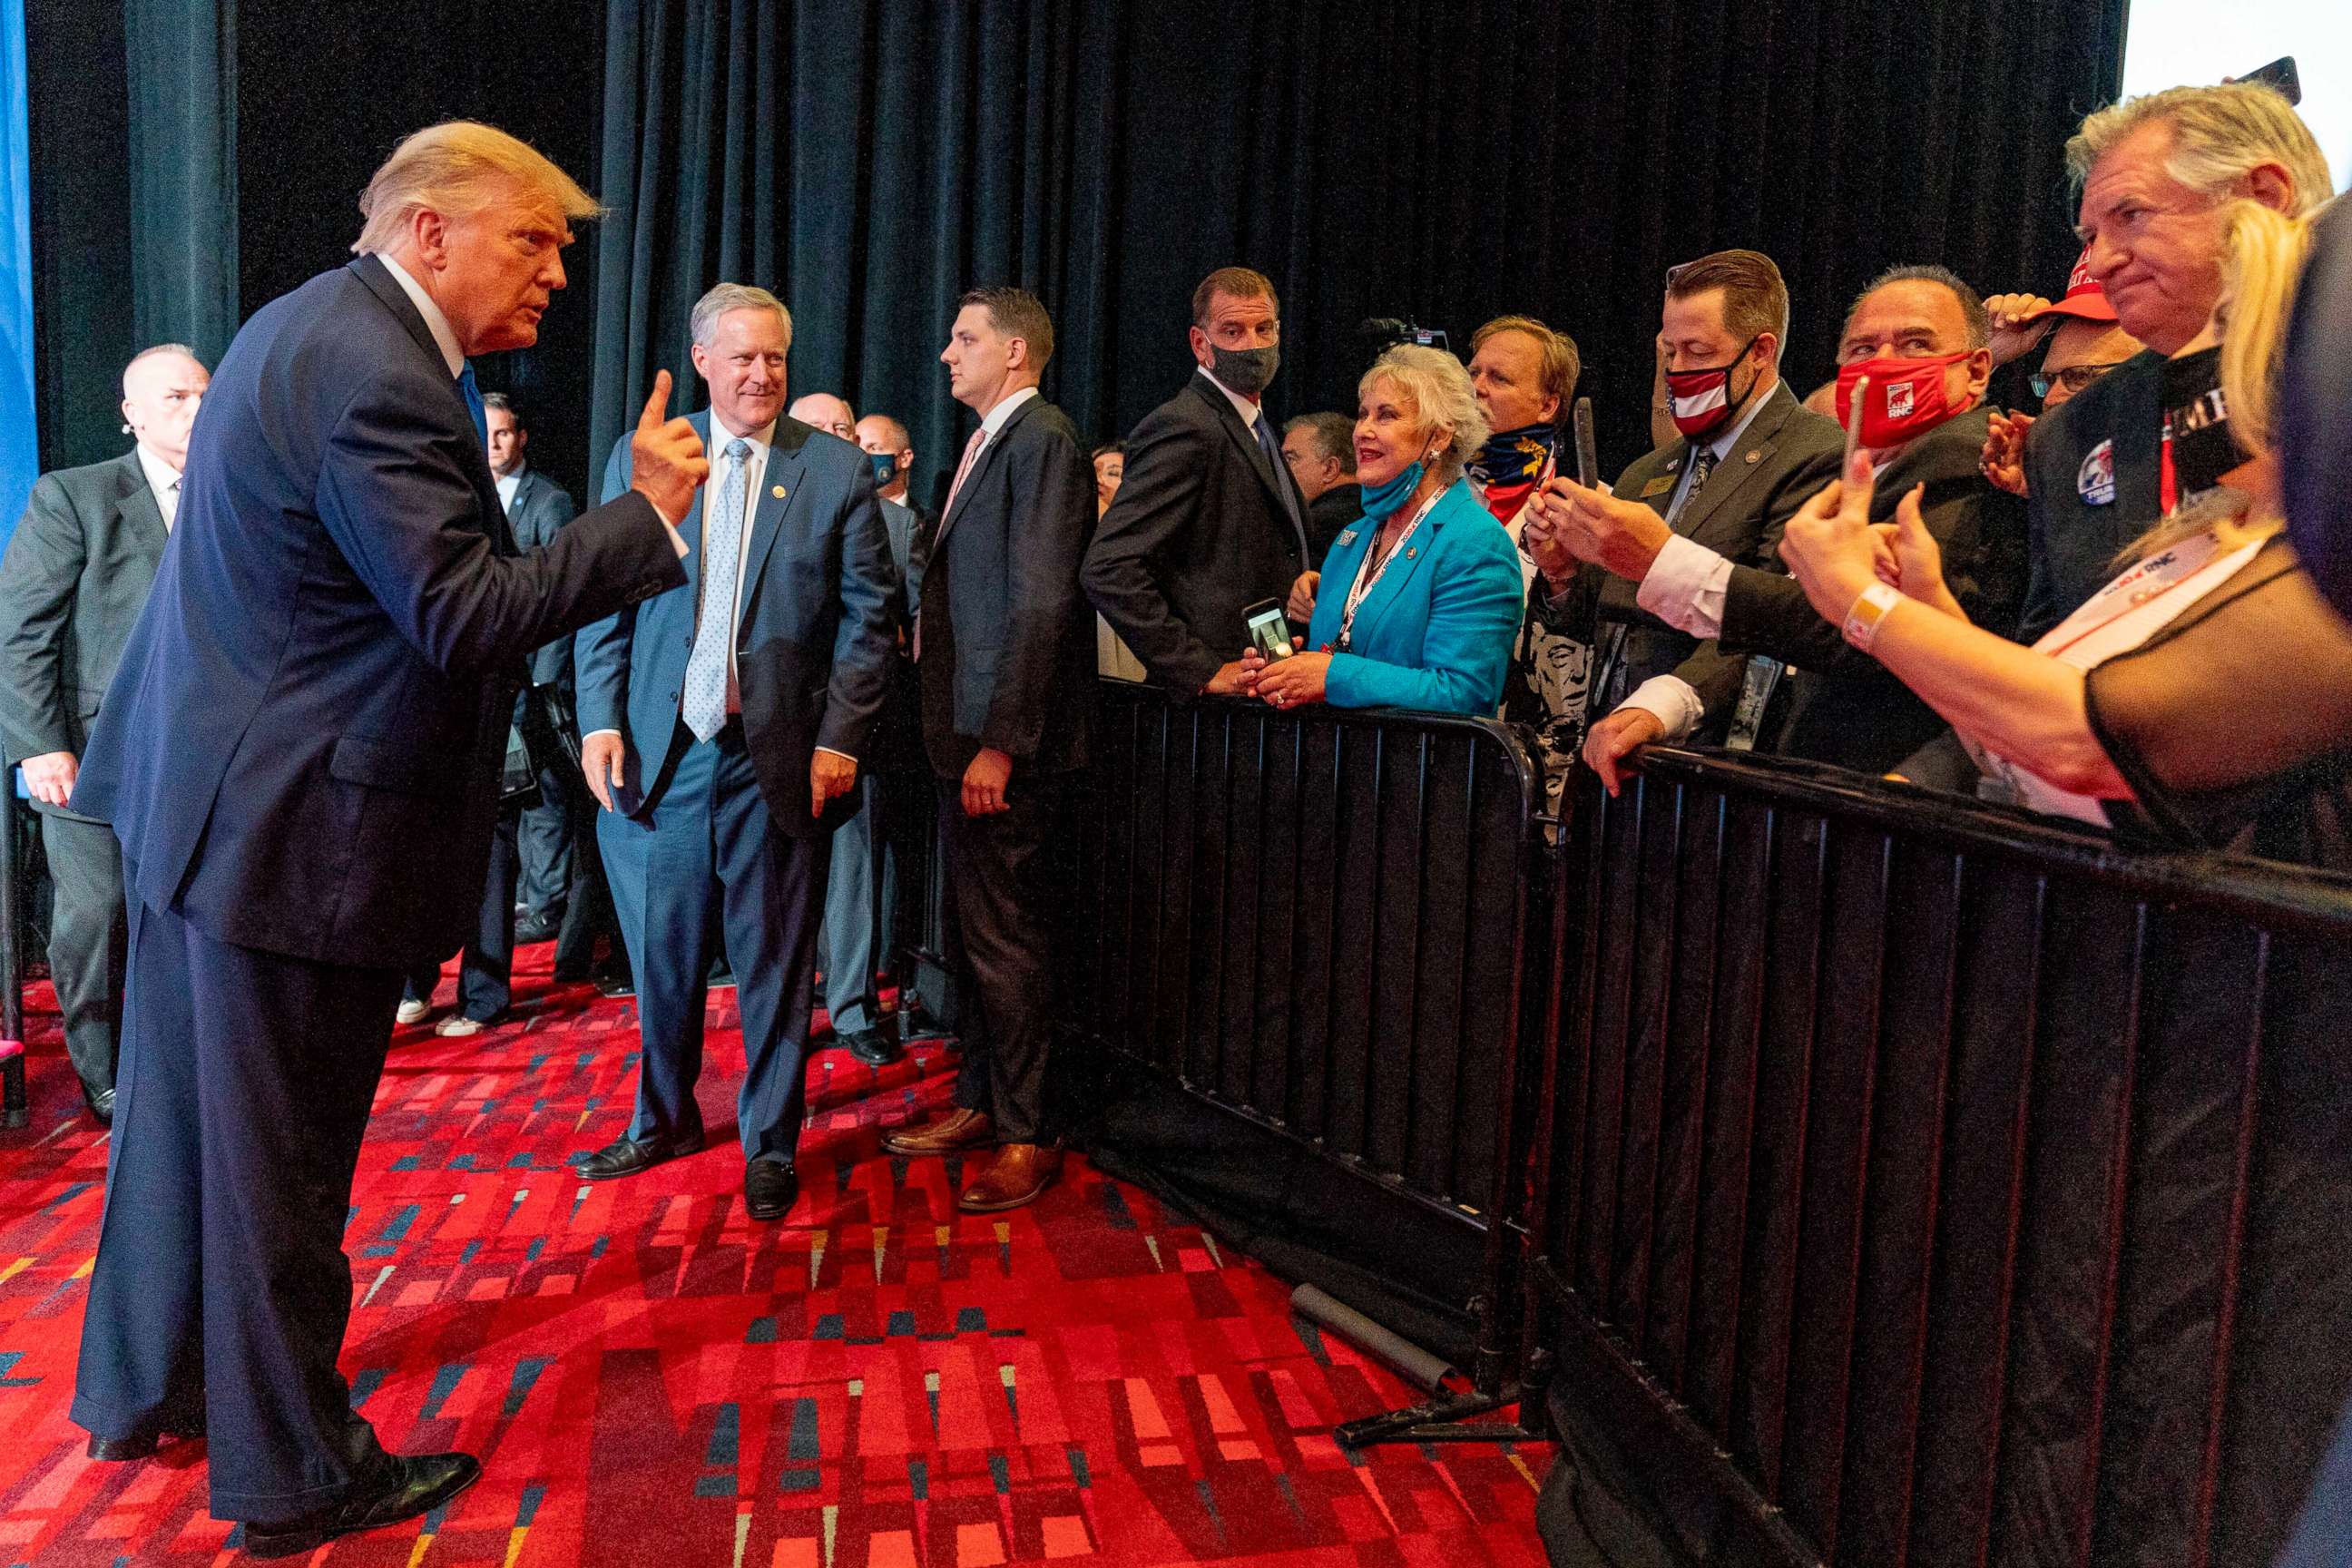 PHOTO: President Donald Trump points to member of the audience after speaking during the first day of the 2020 Republican National Convention in Charlotte, N.C., Aug. 24, 2020.